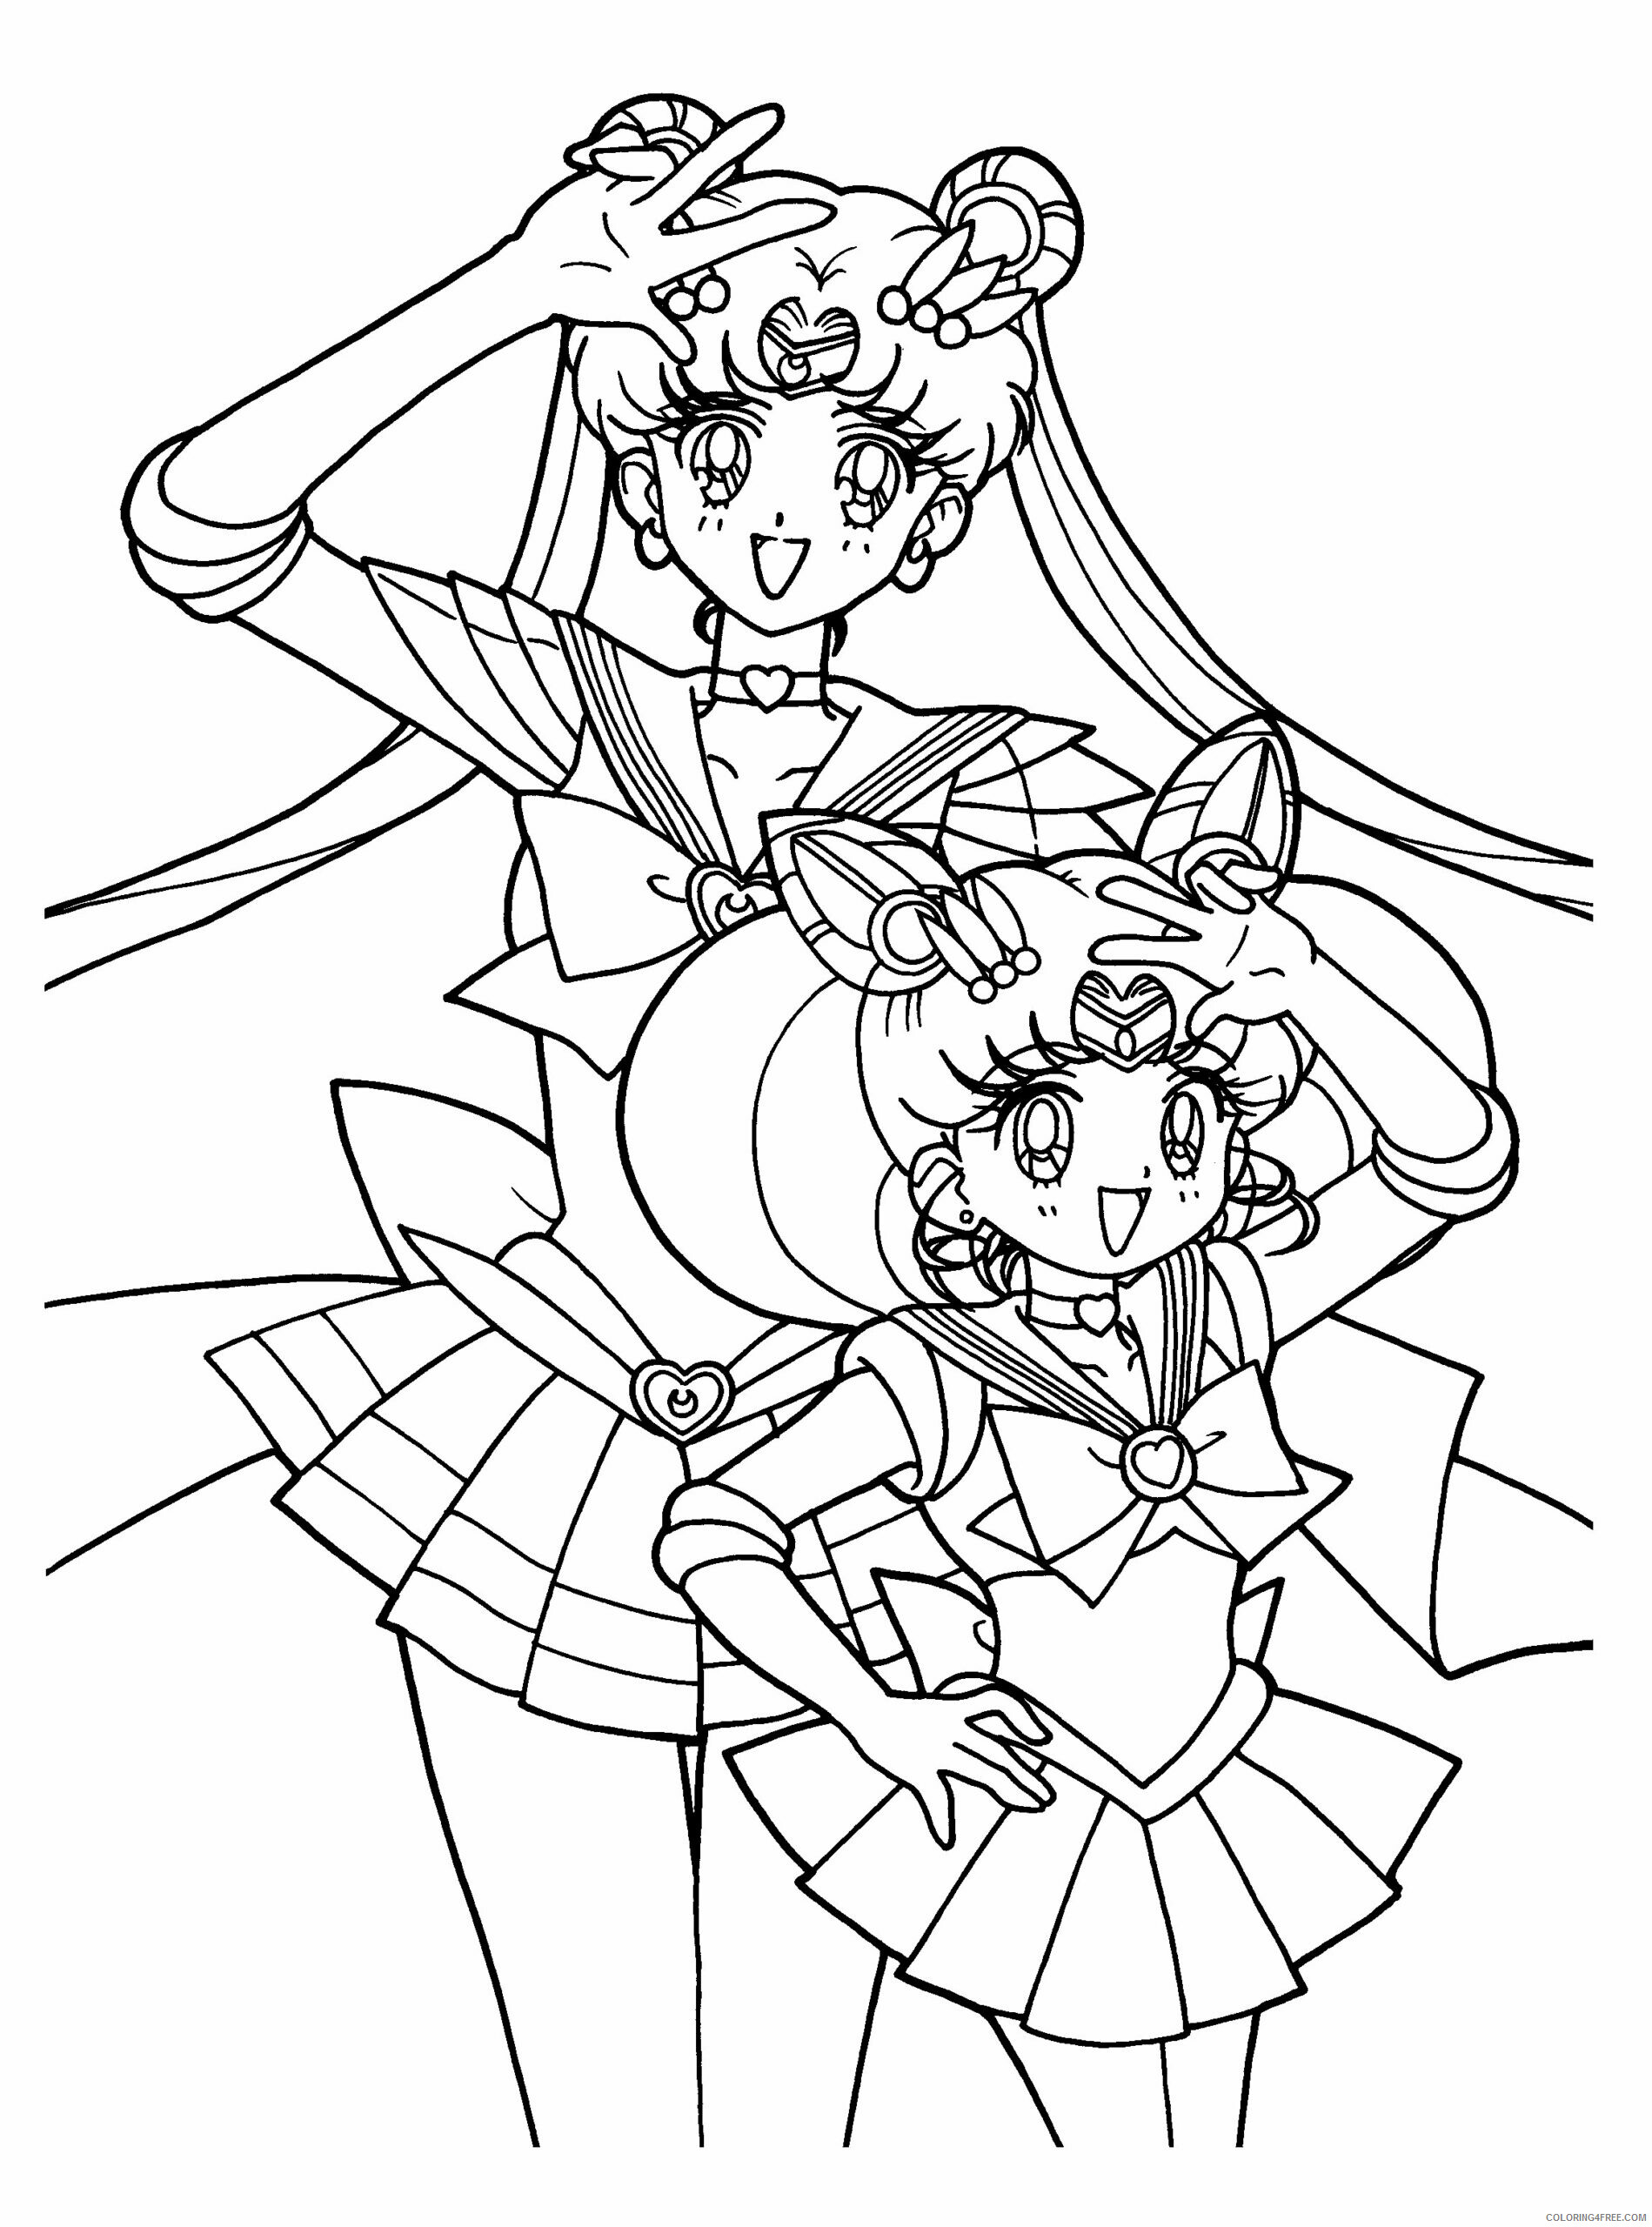 Sailor Moon Printable Coloring Pages Anime Free Sailor Moon For Kids 2021 0969 Coloring4free